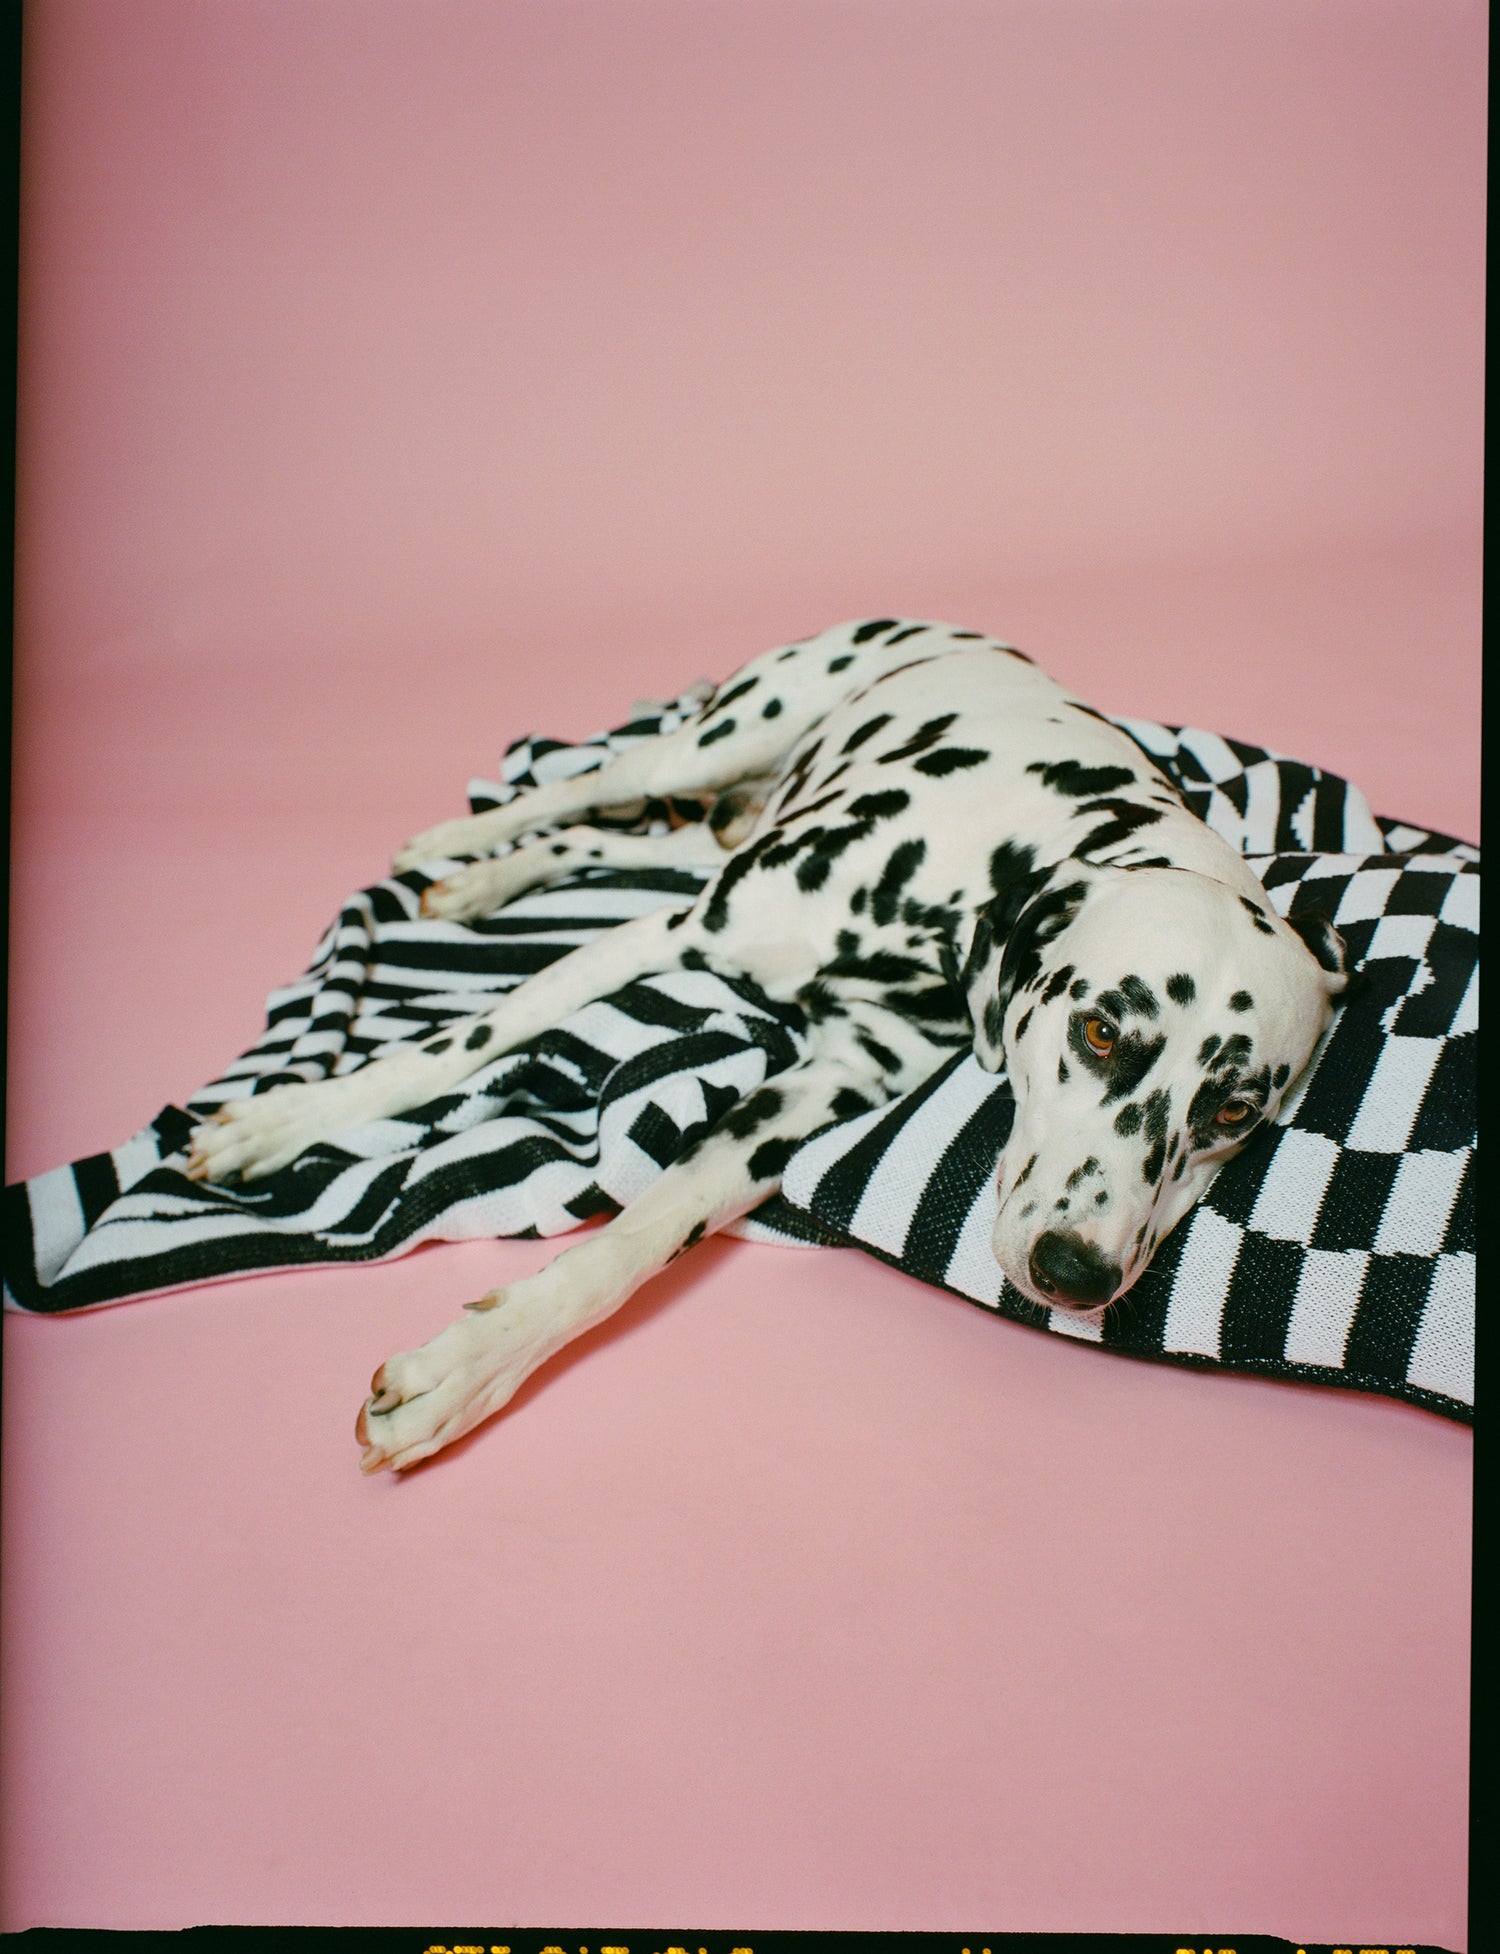 Image of Dalmatian dog laying on top of the Dazzle Blanket against a pink background.